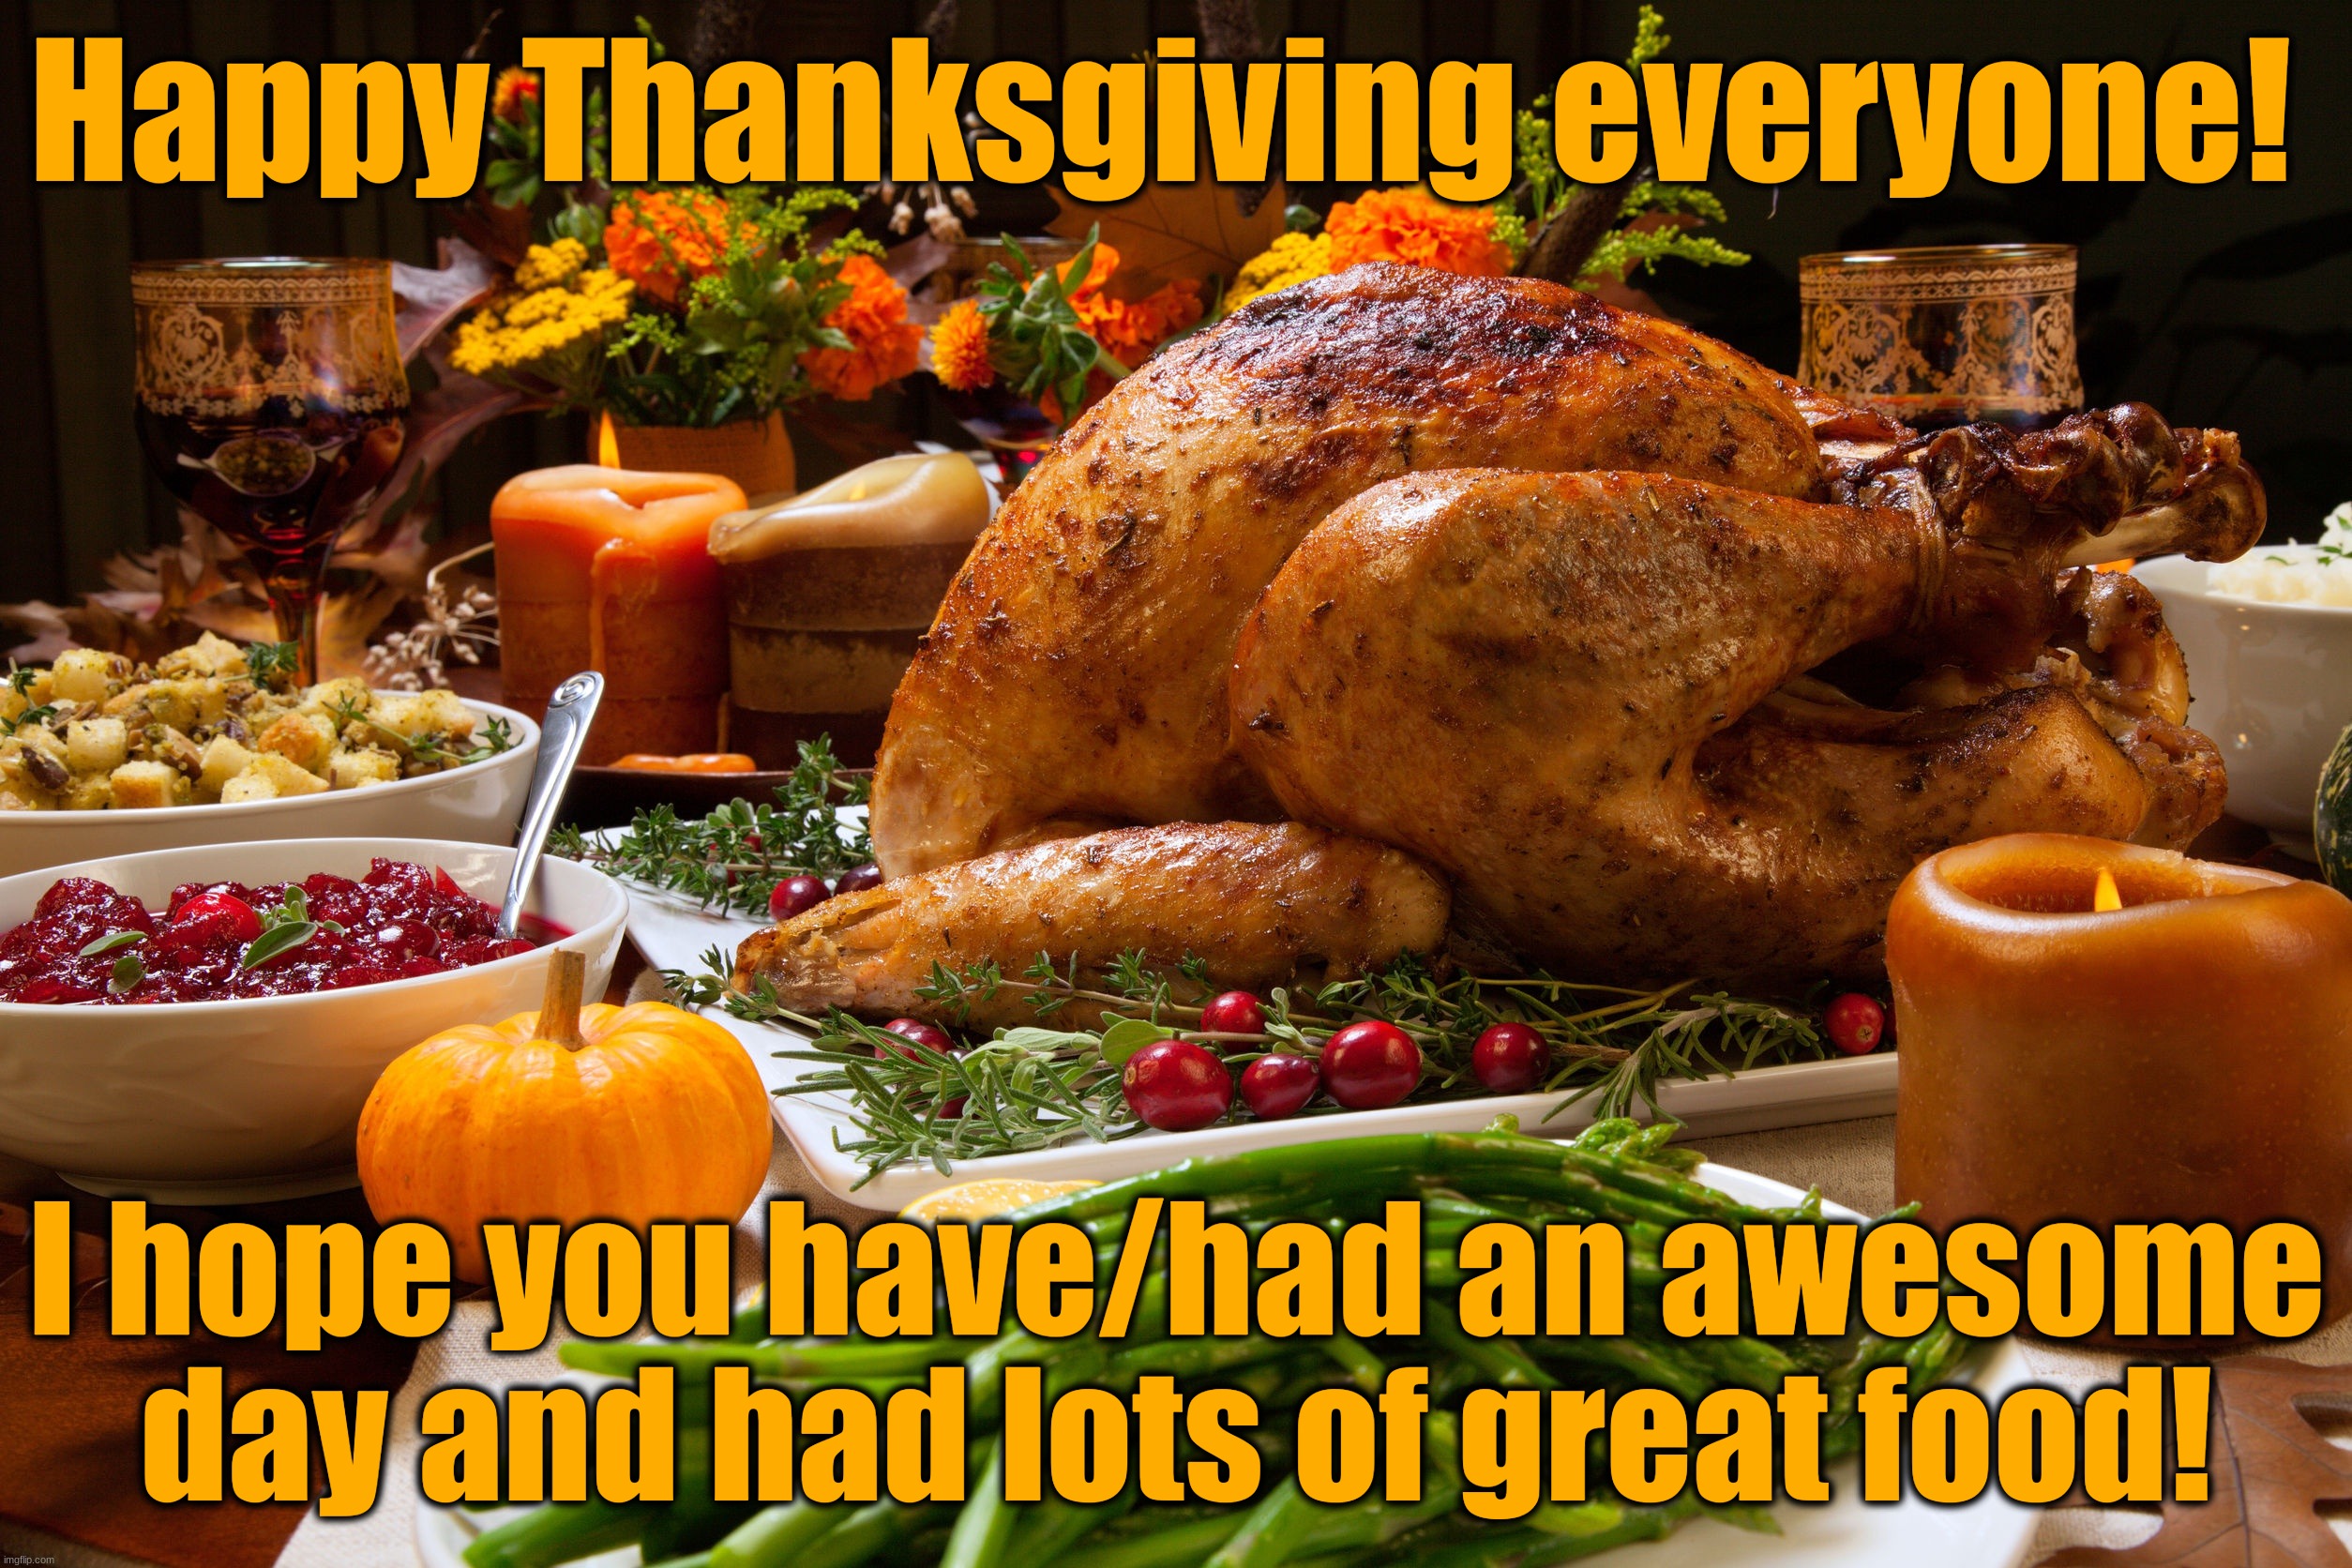 Have a great Thanksgiving everyone! | Happy Thanksgiving everyone! I hope you have/had an awesome day and had lots of great food! | image tagged in memes,thanksgiving,happy thanksgiving,food,celebration,thankful | made w/ Imgflip meme maker